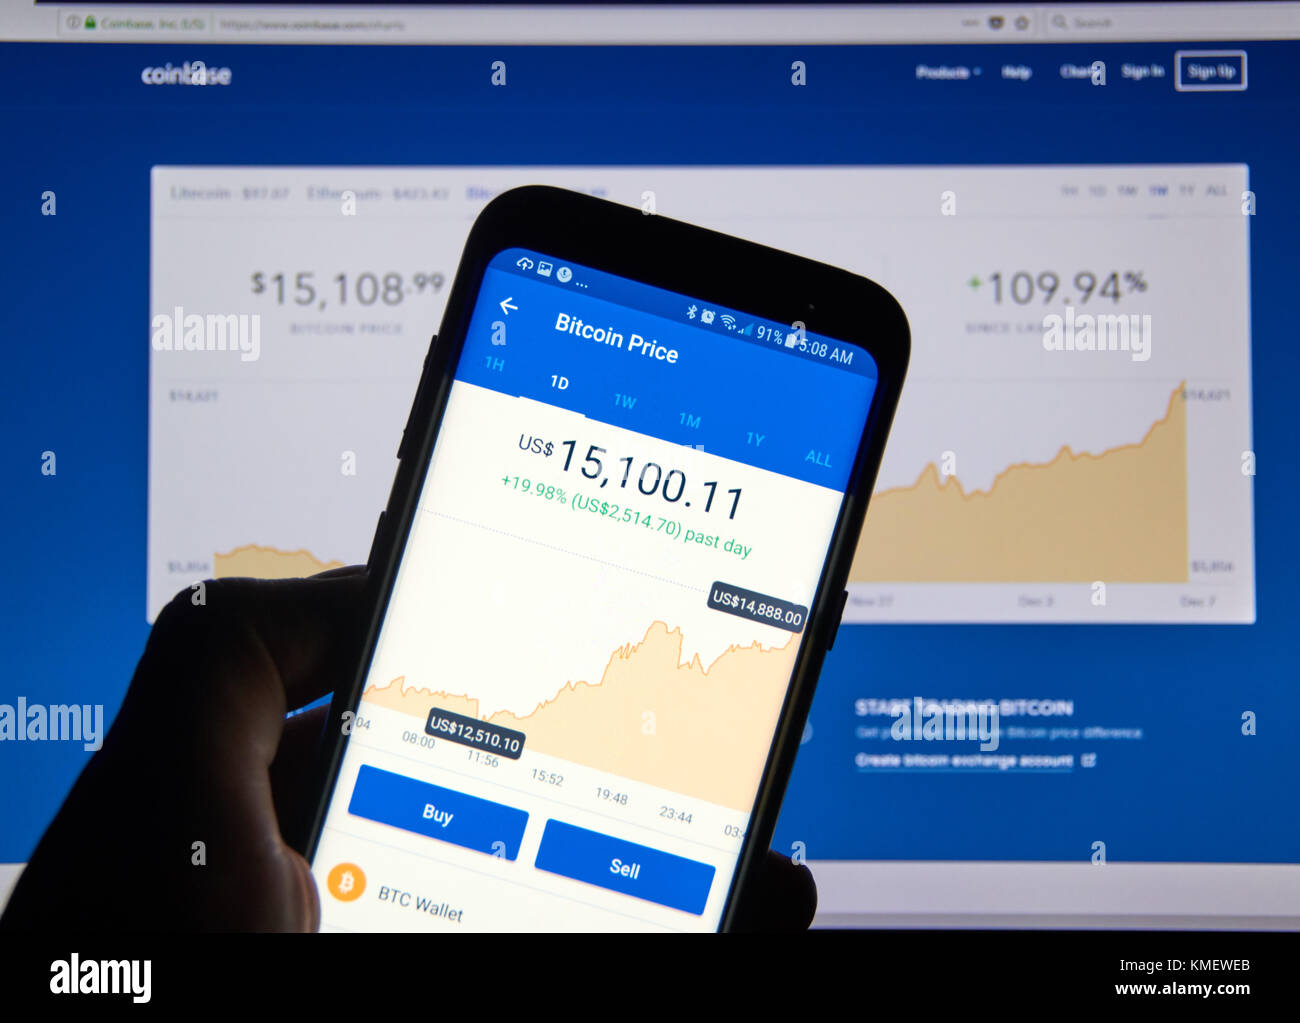 How To Sell Bitcoin In Canada Coinbase : Coinbase Cryptocurrency Exchange Site Editorial Photography Image Of Digital Exchange 146048152 - You can process a request for selling through their website and redeem cash for your btc through the closest btc atm.